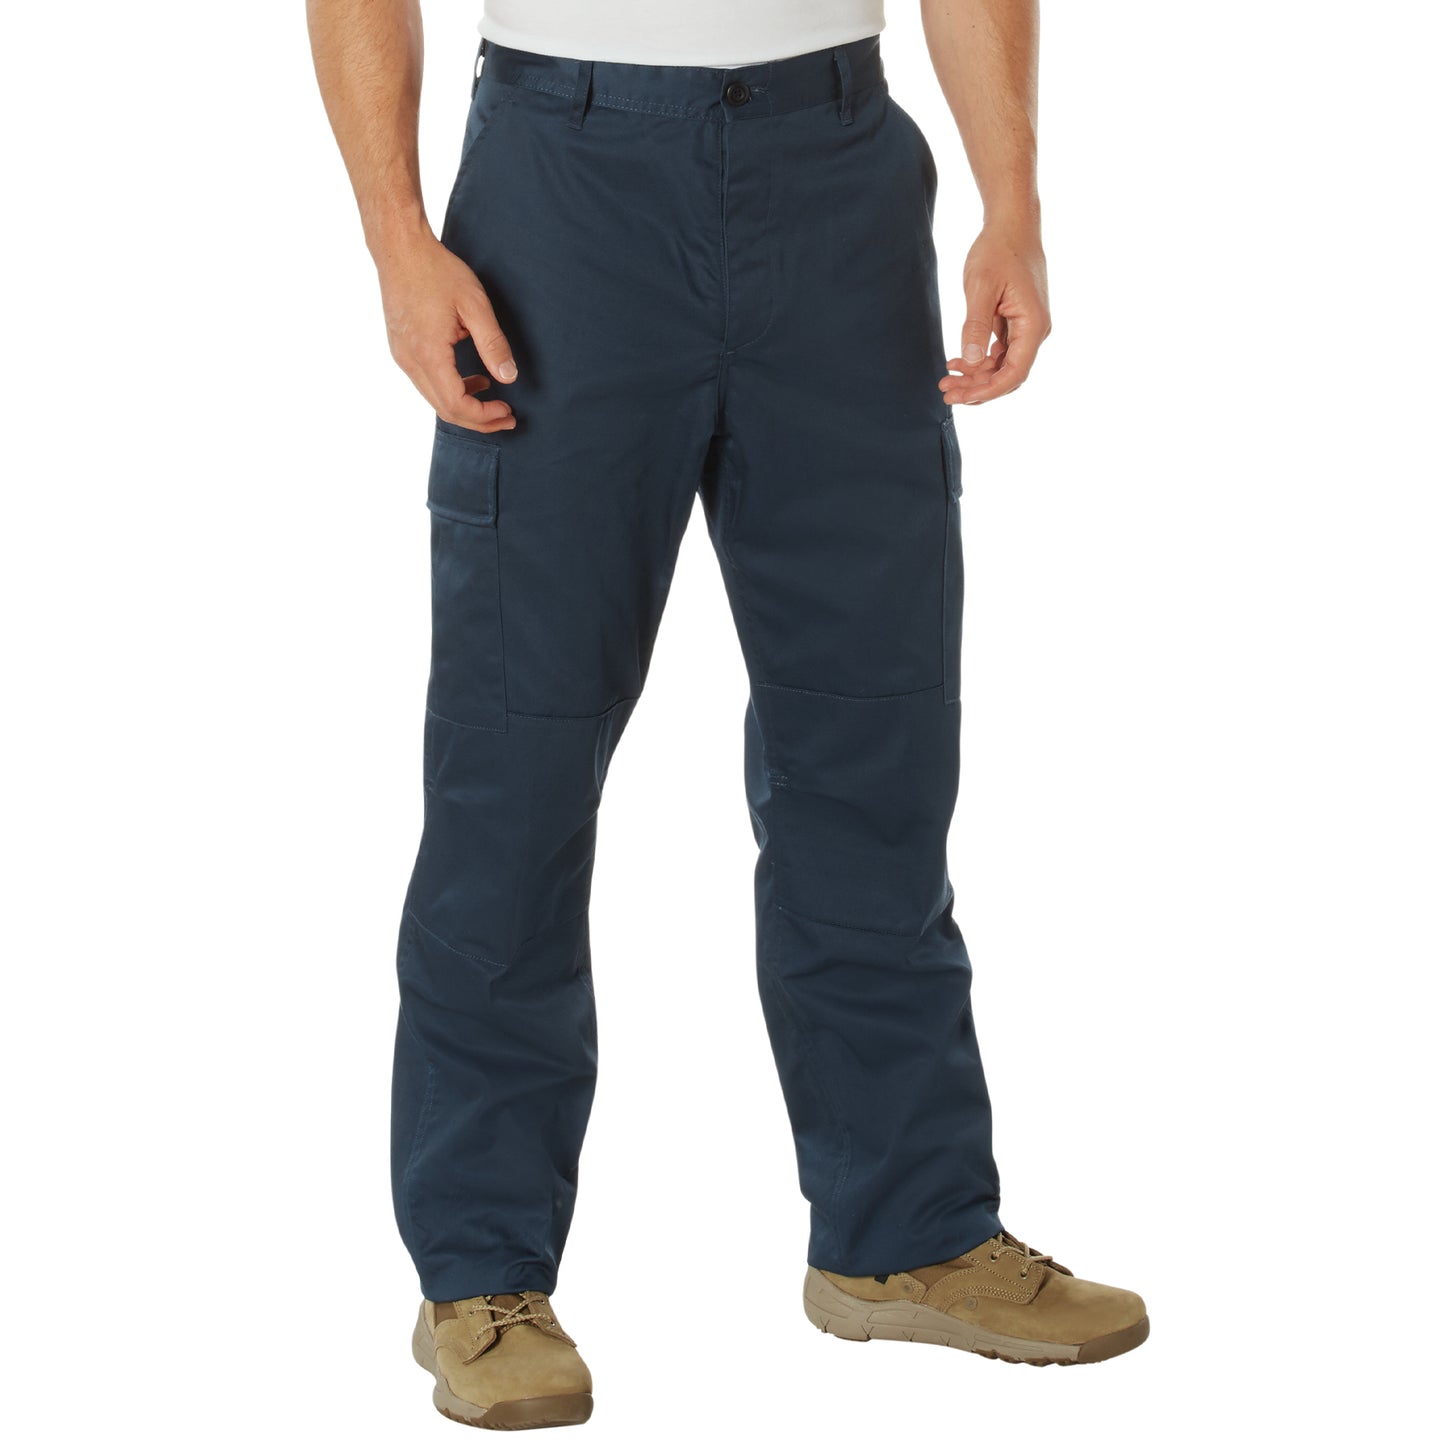 BDU Tactical Pants - Army Style Cargo Work Fatigues